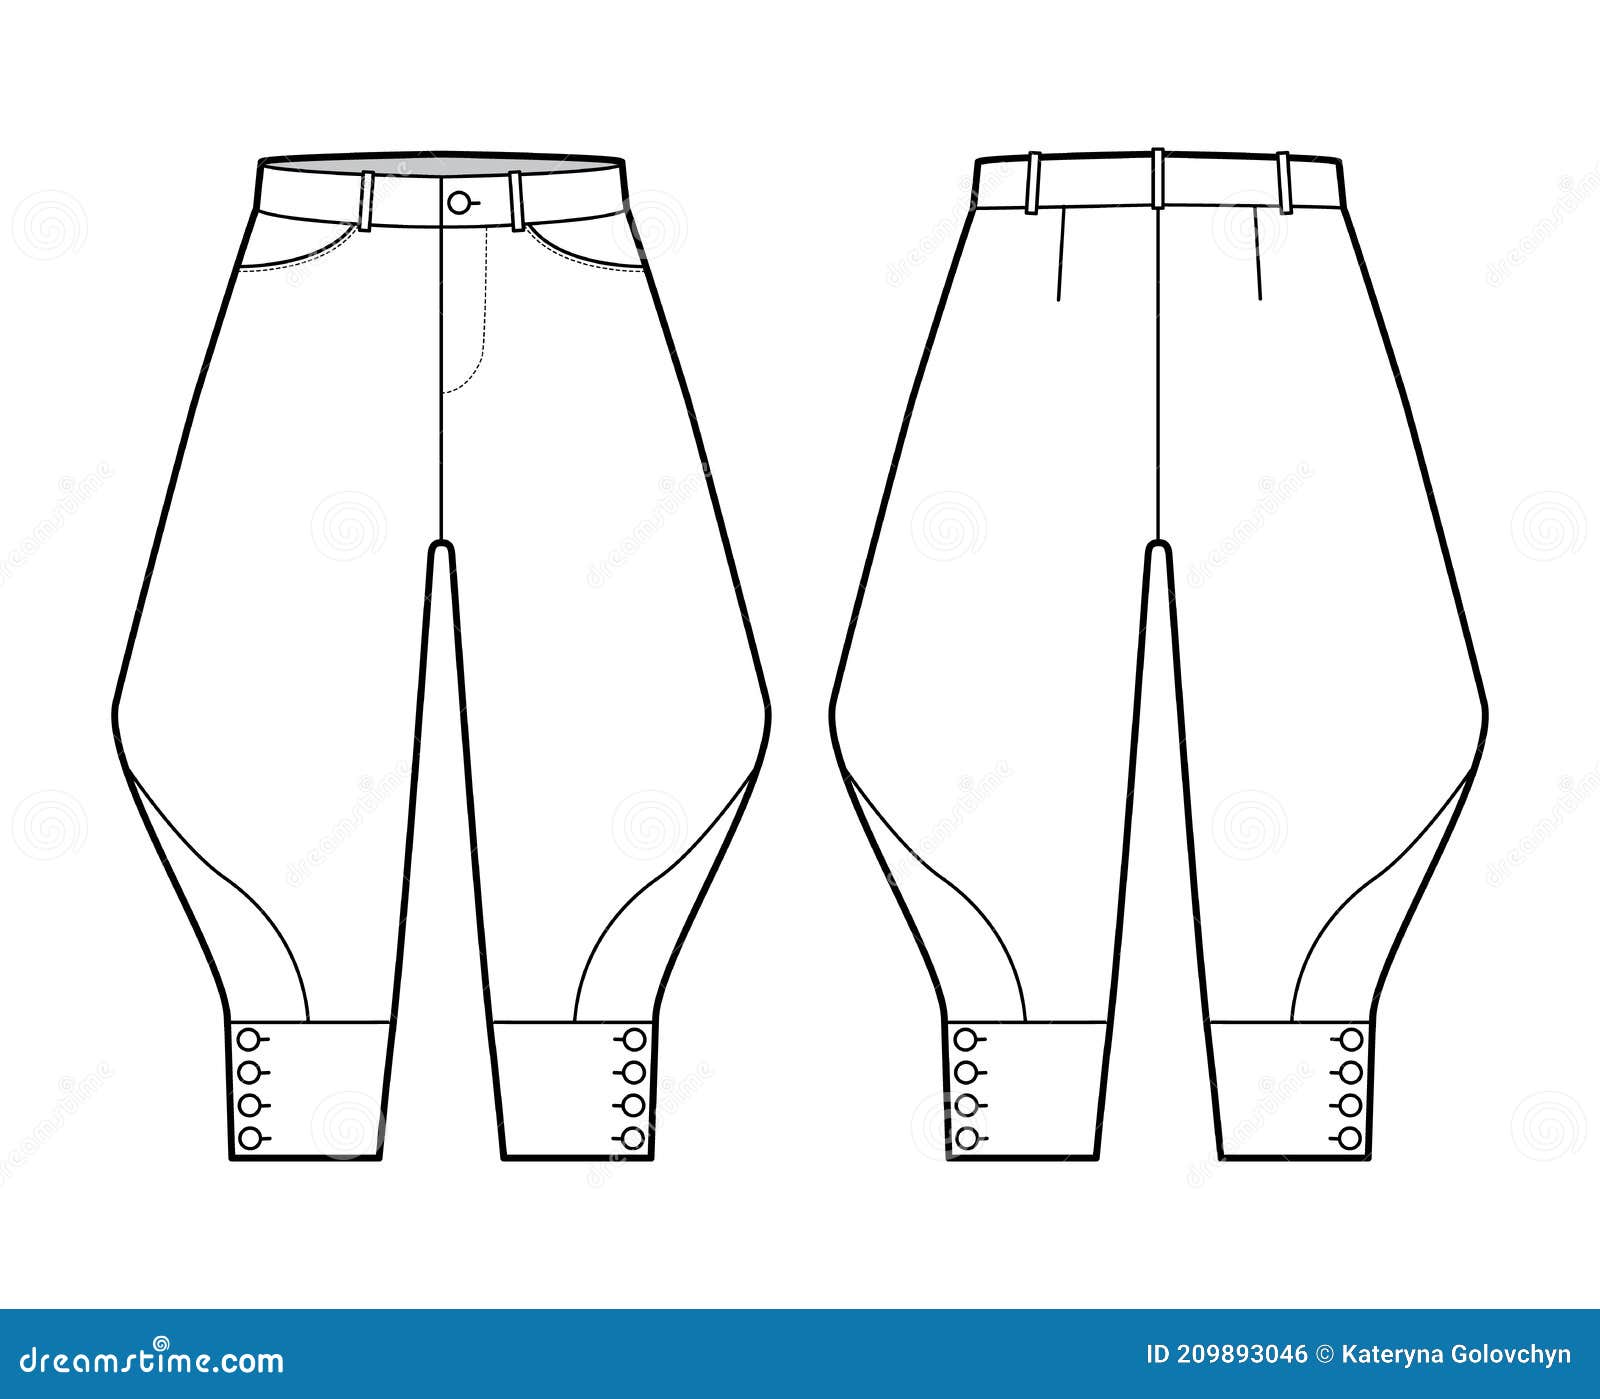 Riding Breeches Short Pants Technical Fashion Illustration with Knee ...